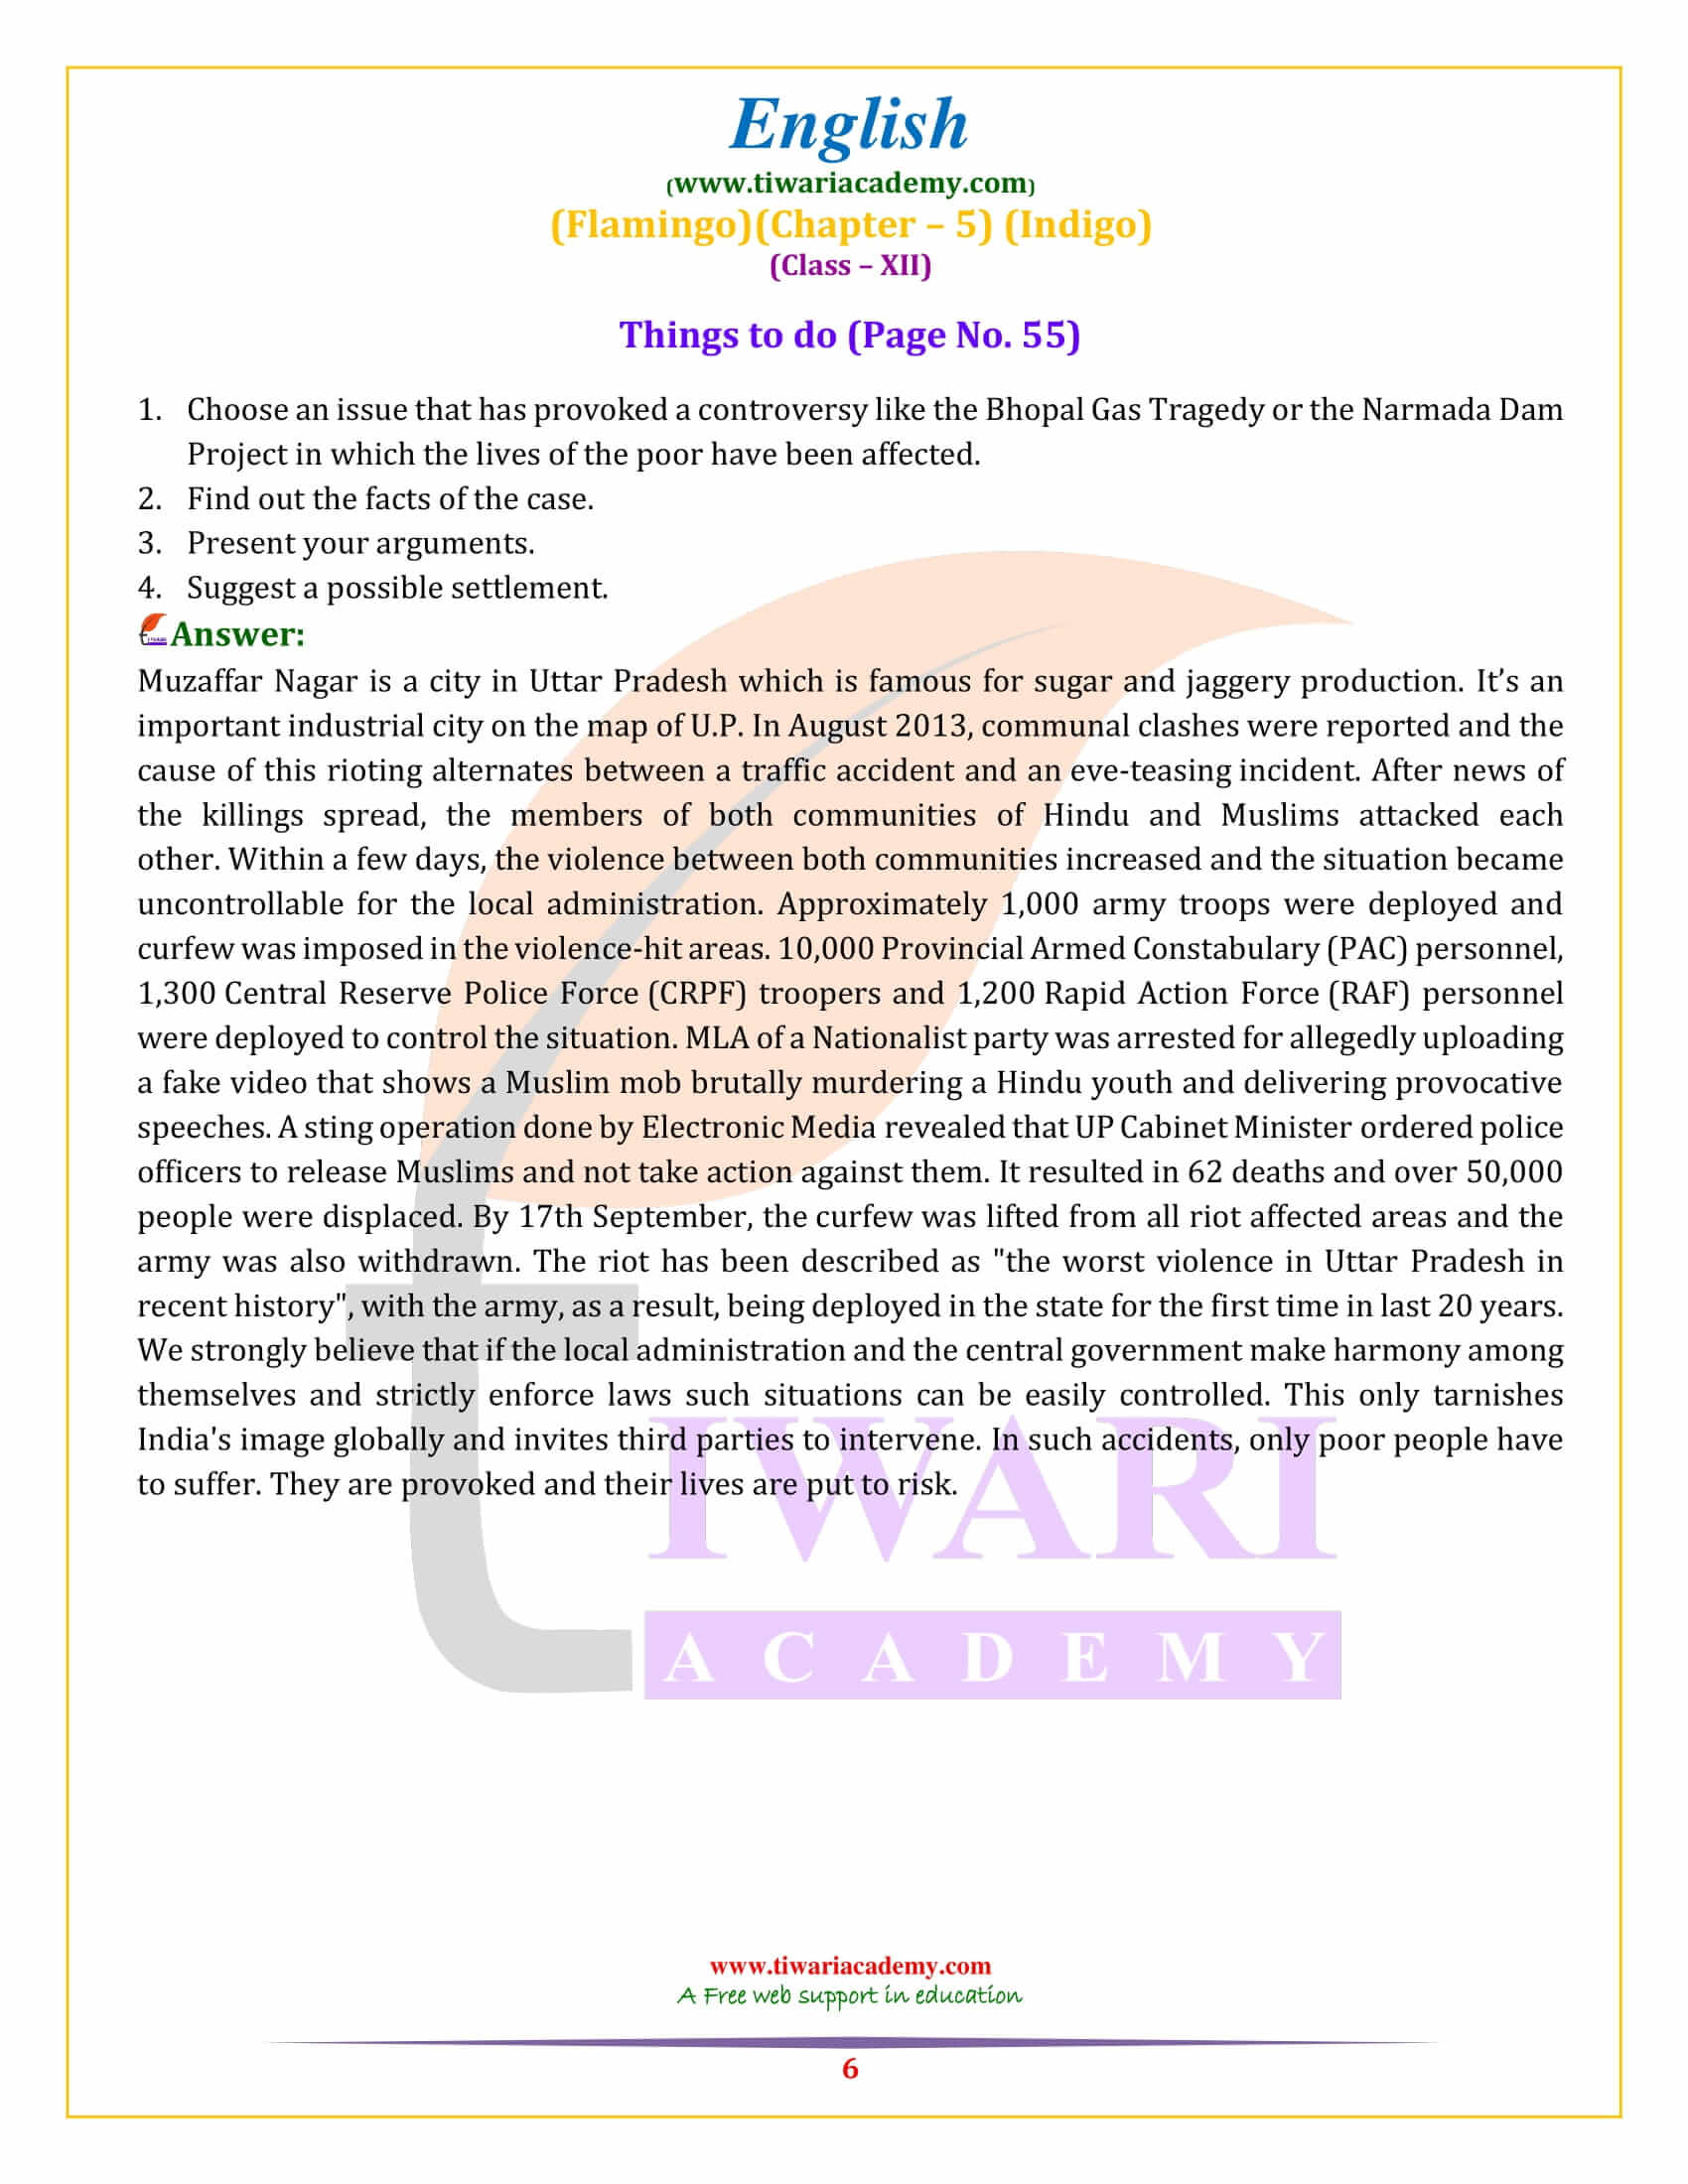 NCERT Solutions for Class 12 English Flamingo Chapter 5 free